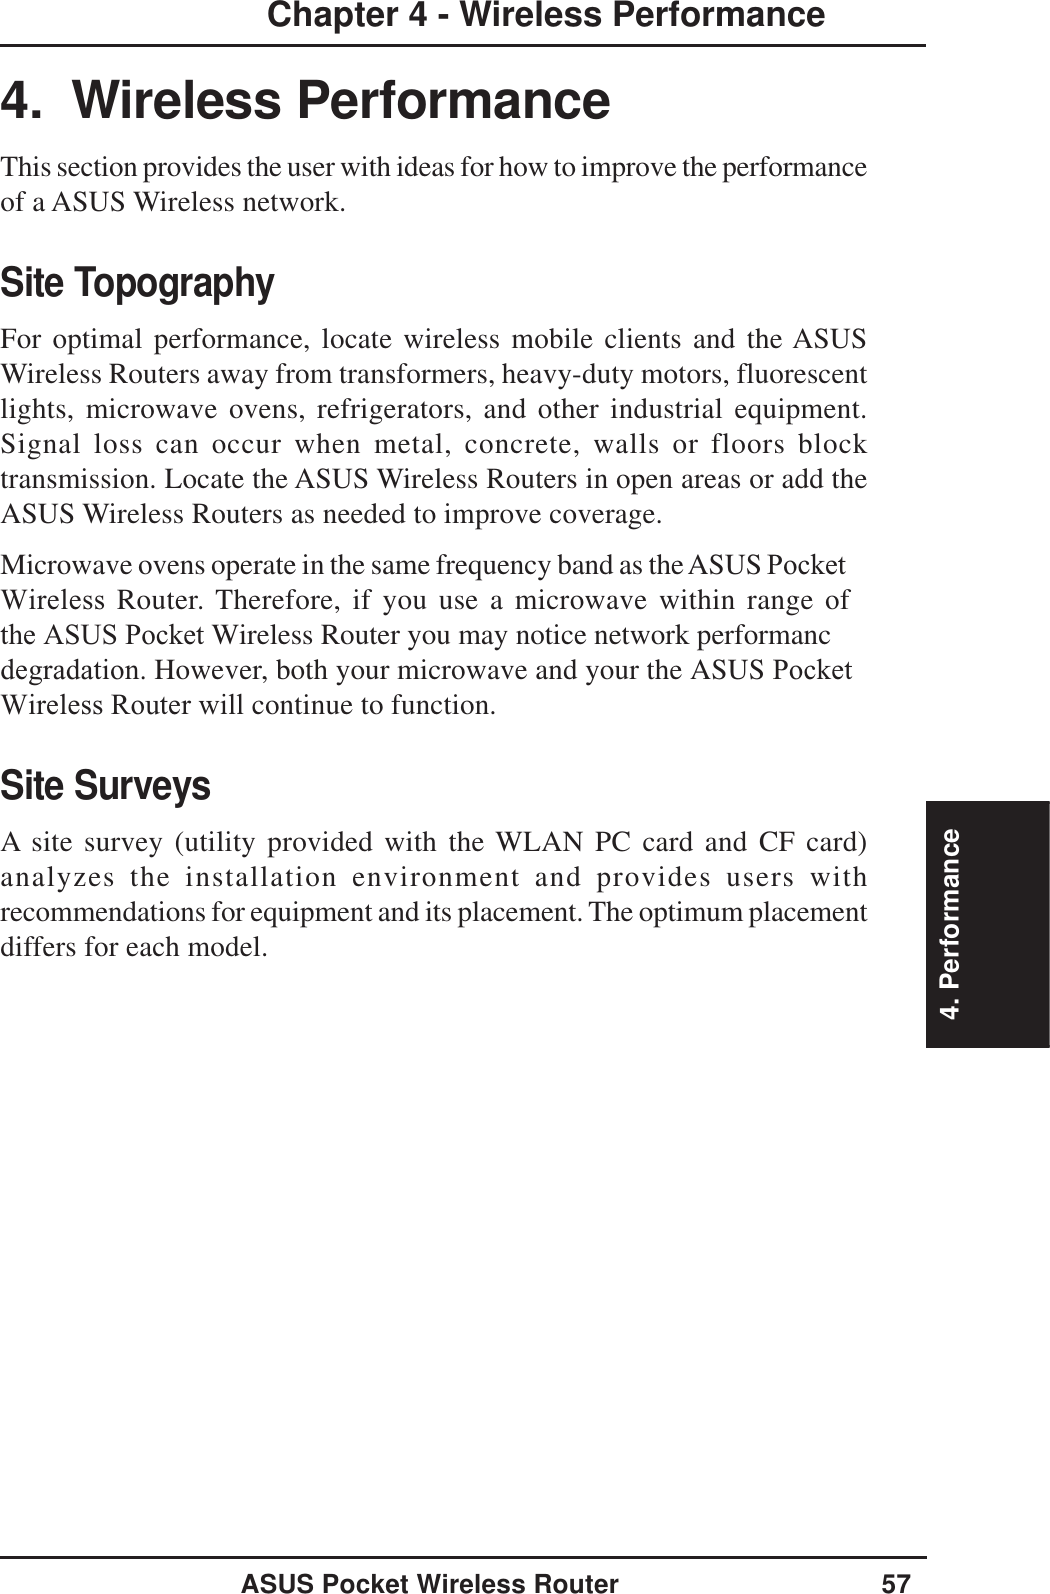 4. PerformanceASUS Pocket Wireless Router 57Chapter 4 - Wireless Performance4.  Wireless PerformanceThis section provides the user with ideas for how to improve the performanceof a ASUS Wireless network.Site TopographyFor optimal performance, locate wireless mobile clients and the ASUSWireless Routers away from transformers, heavy-duty motors, fluorescentlights, microwave ovens, refrigerators, and other industrial equipment.Signal loss can occur when metal, concrete, walls or floors blocktransmission. Locate the ASUS Wireless Routers in open areas or add theASUS Wireless Routers as needed to improve coverage.Microwave ovens operate in the same frequency band as theASUS PocketWireless Router. Therefore, if you use a microwave within range of the ASUS Pocket Wireless Router you may notice network performancdegradation. However, both your microwave and your the ASUS PocketWireless Router will continue to function.Site SurveysA site survey (utility provided with the WLAN PC card and CF card)analyzes the installation environment and provides users withrecommendations for equipment and its placement. The optimum placementdiffers for each model.